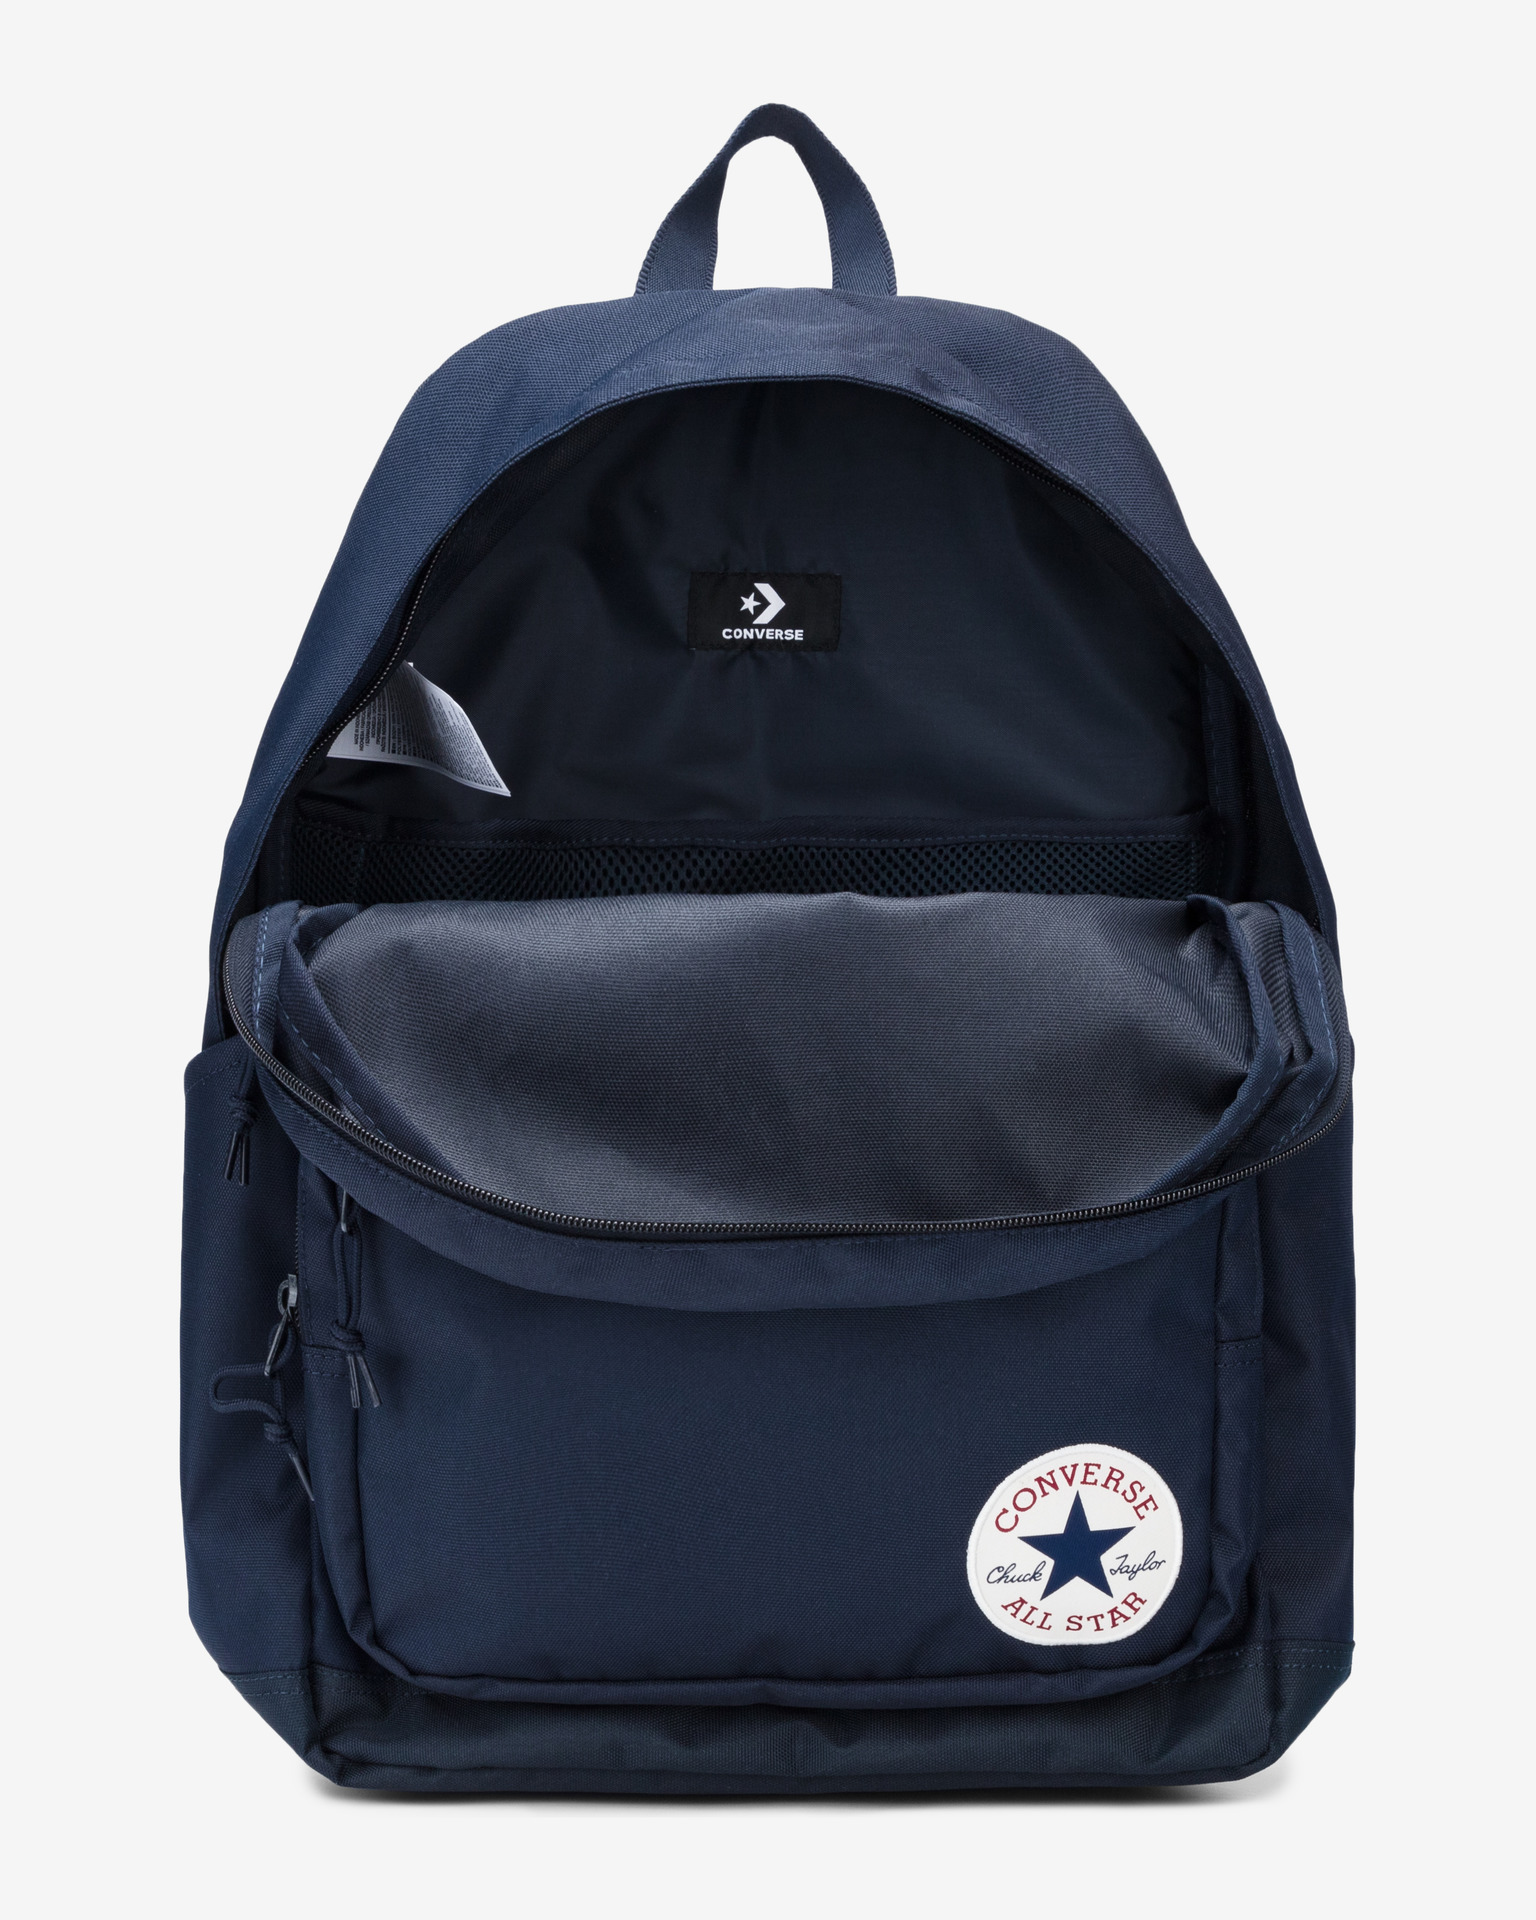 CONVERSE GO LO BACKPACK BLACK - Central.co.th